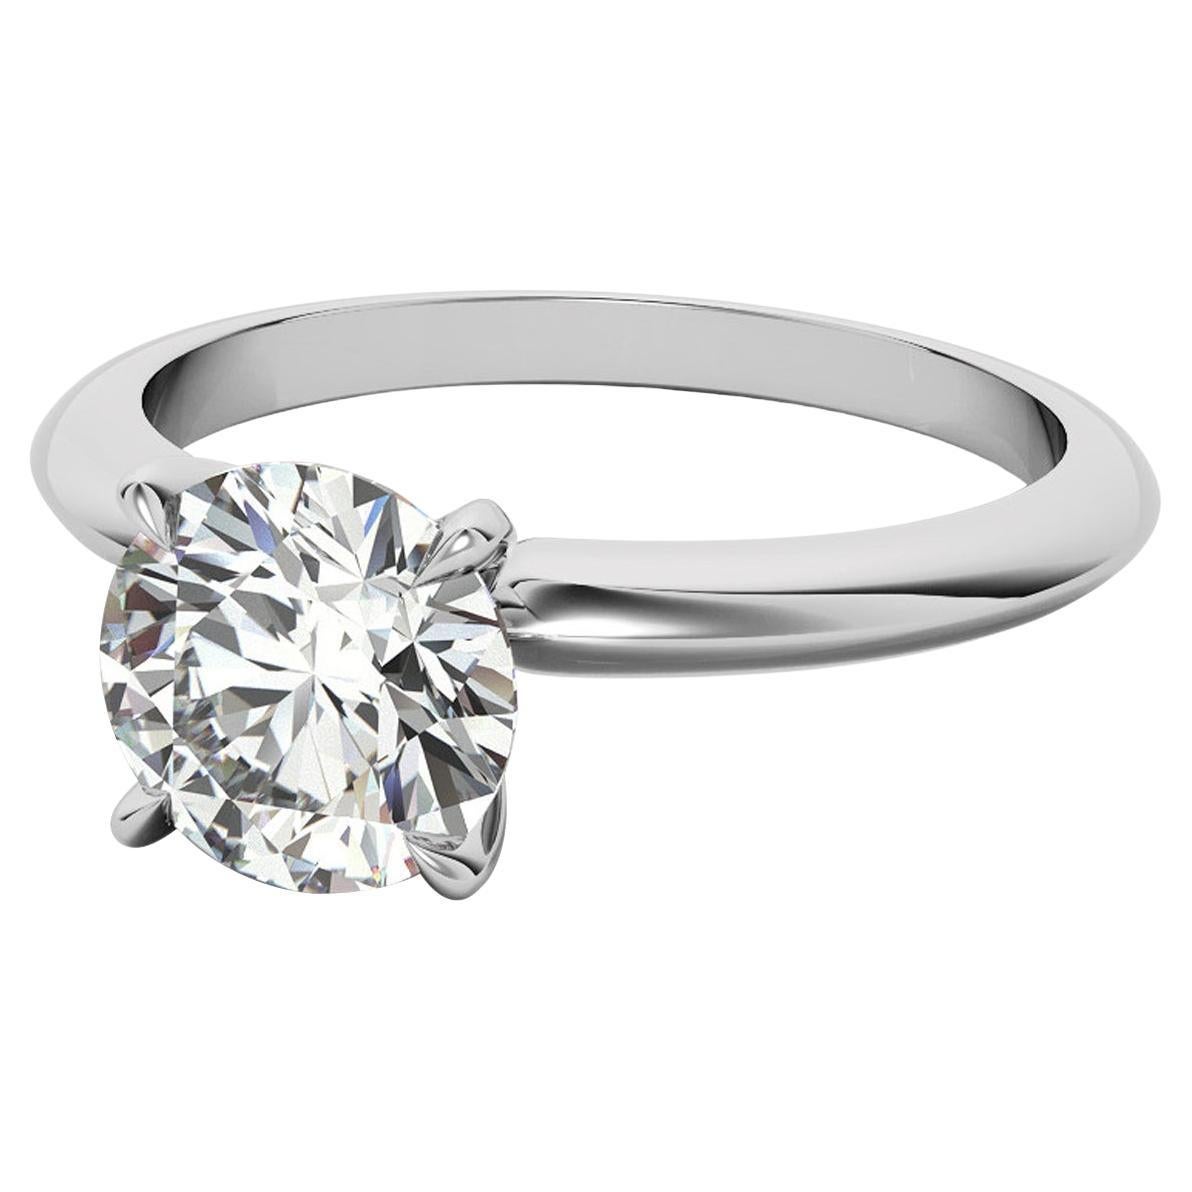 2.41 Carat Natural Round Diamond Ring 4-Prong Tiffany Style in 14K White Gold